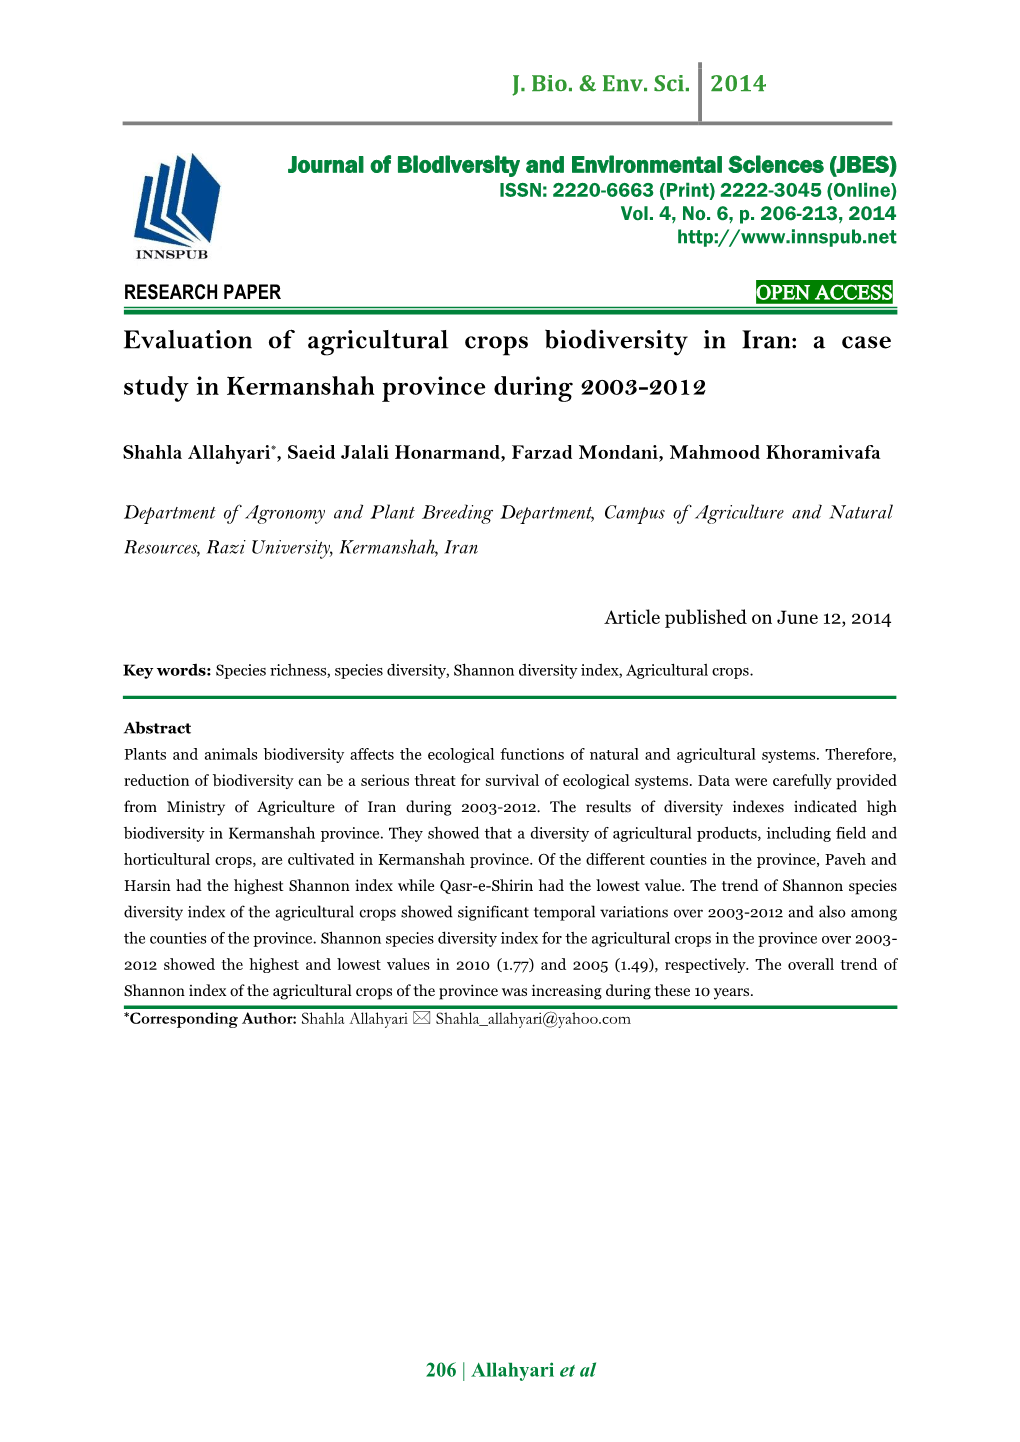 Evaluation of Agricultural Crops Biodiversity in Iran: a Case Study in Kermanshah Province During 2003-2012